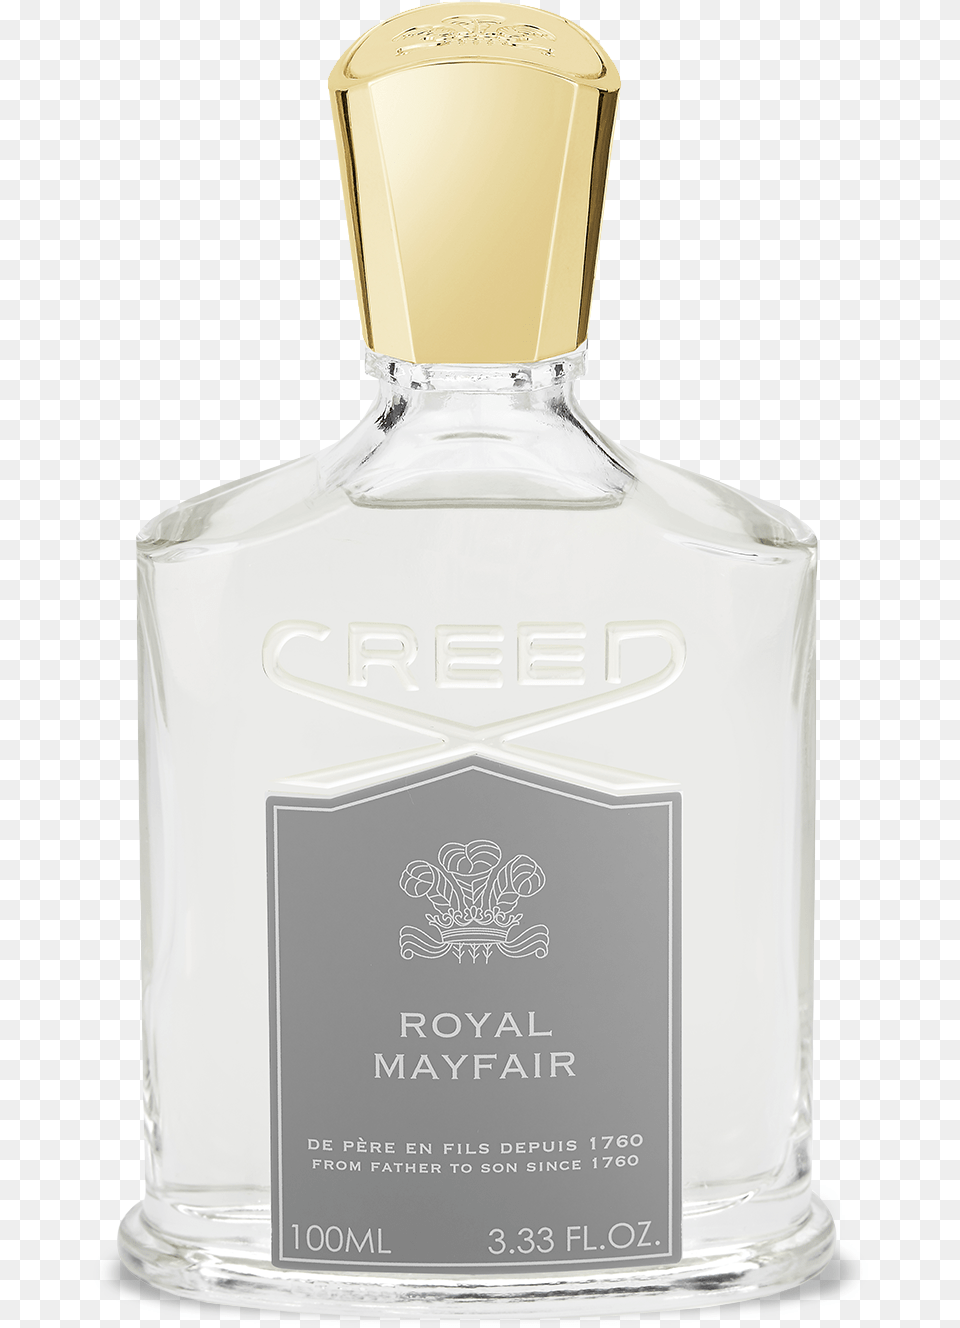 Creed Royal Mayfair, Bottle, Cosmetics, Perfume, Alcohol Free Transparent Png